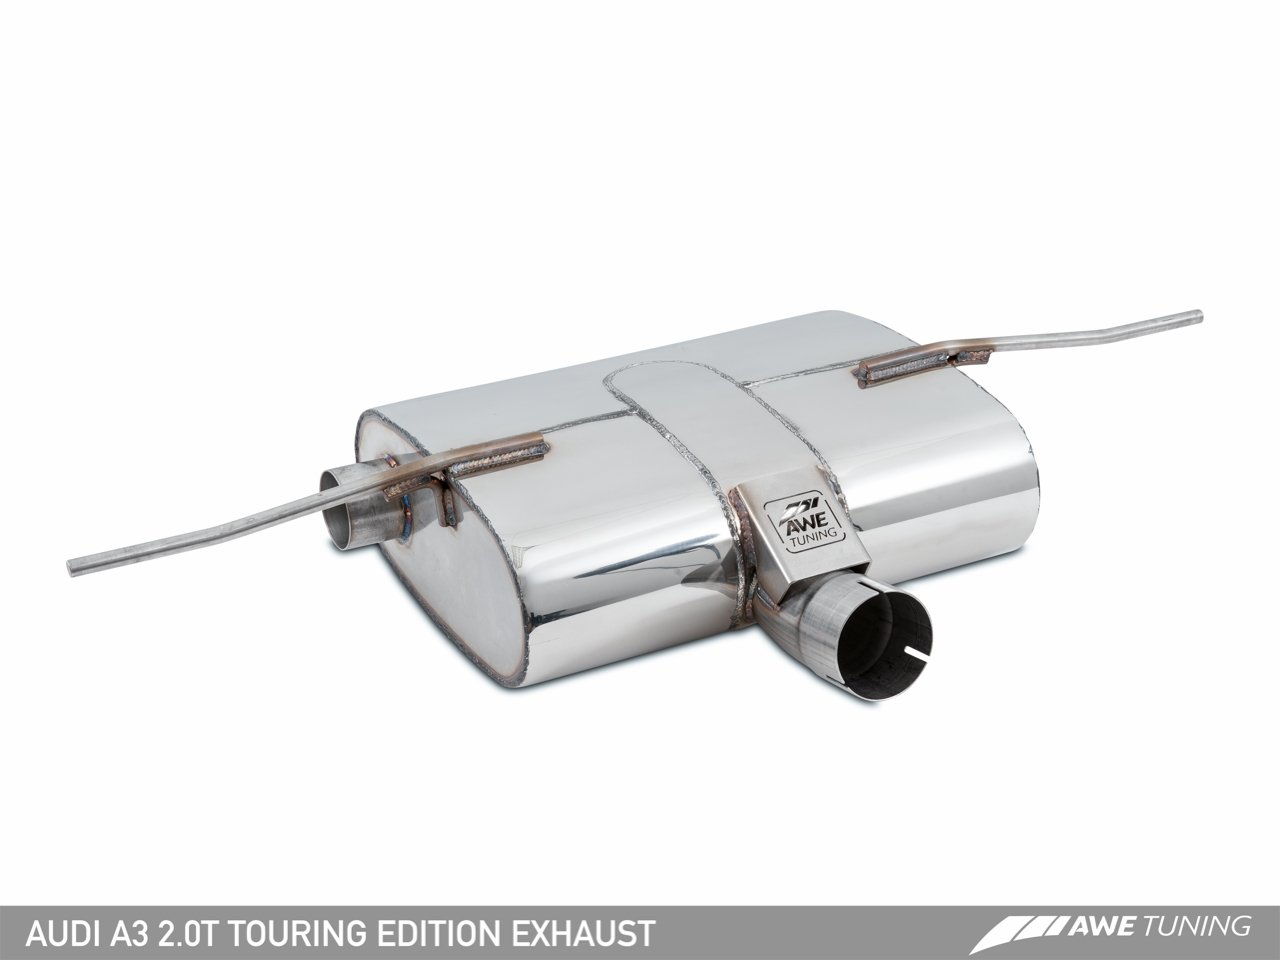 Touring Edition Exhaust for Audi 8V A3 2.0T - Dual Outlet, Diamond Black 90 mm Tips